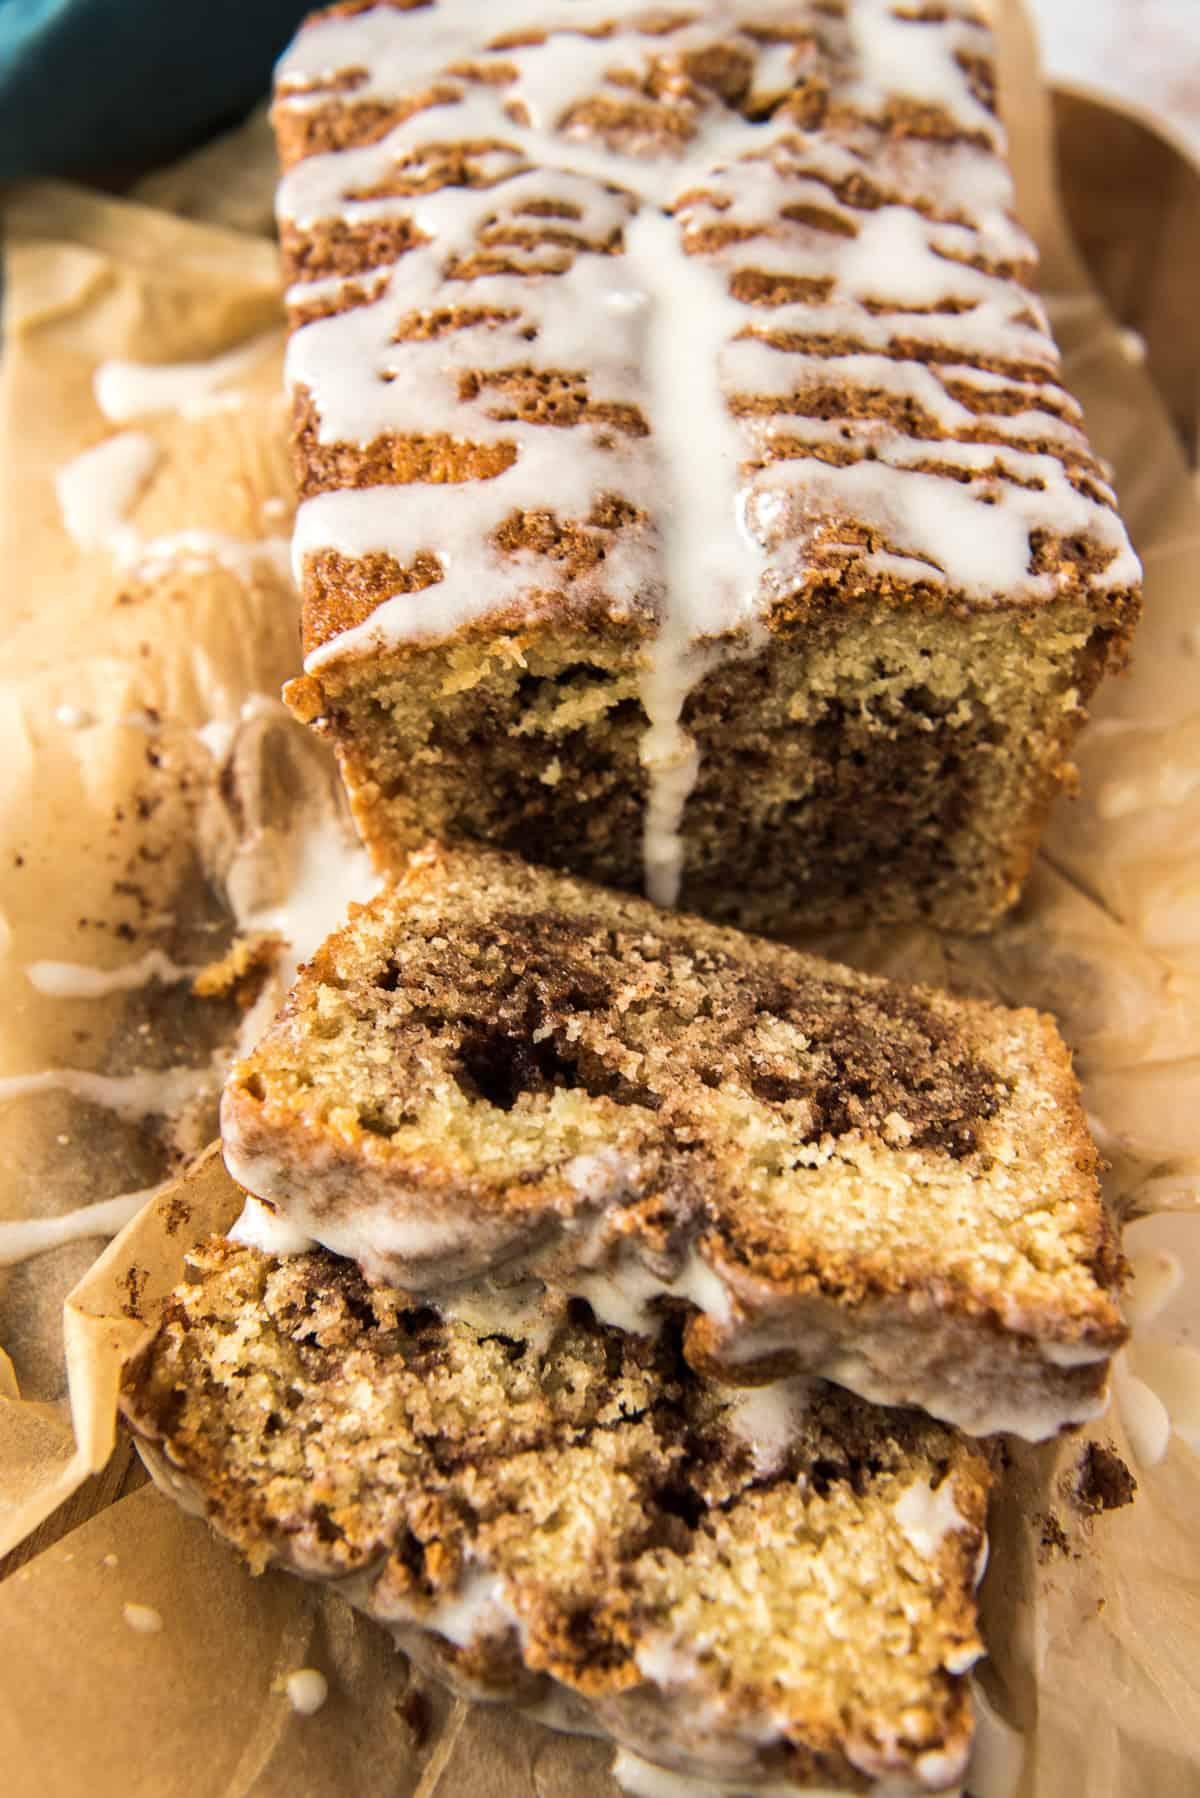 A sliced loaf of Cinnamon Swirl Bread with icing.